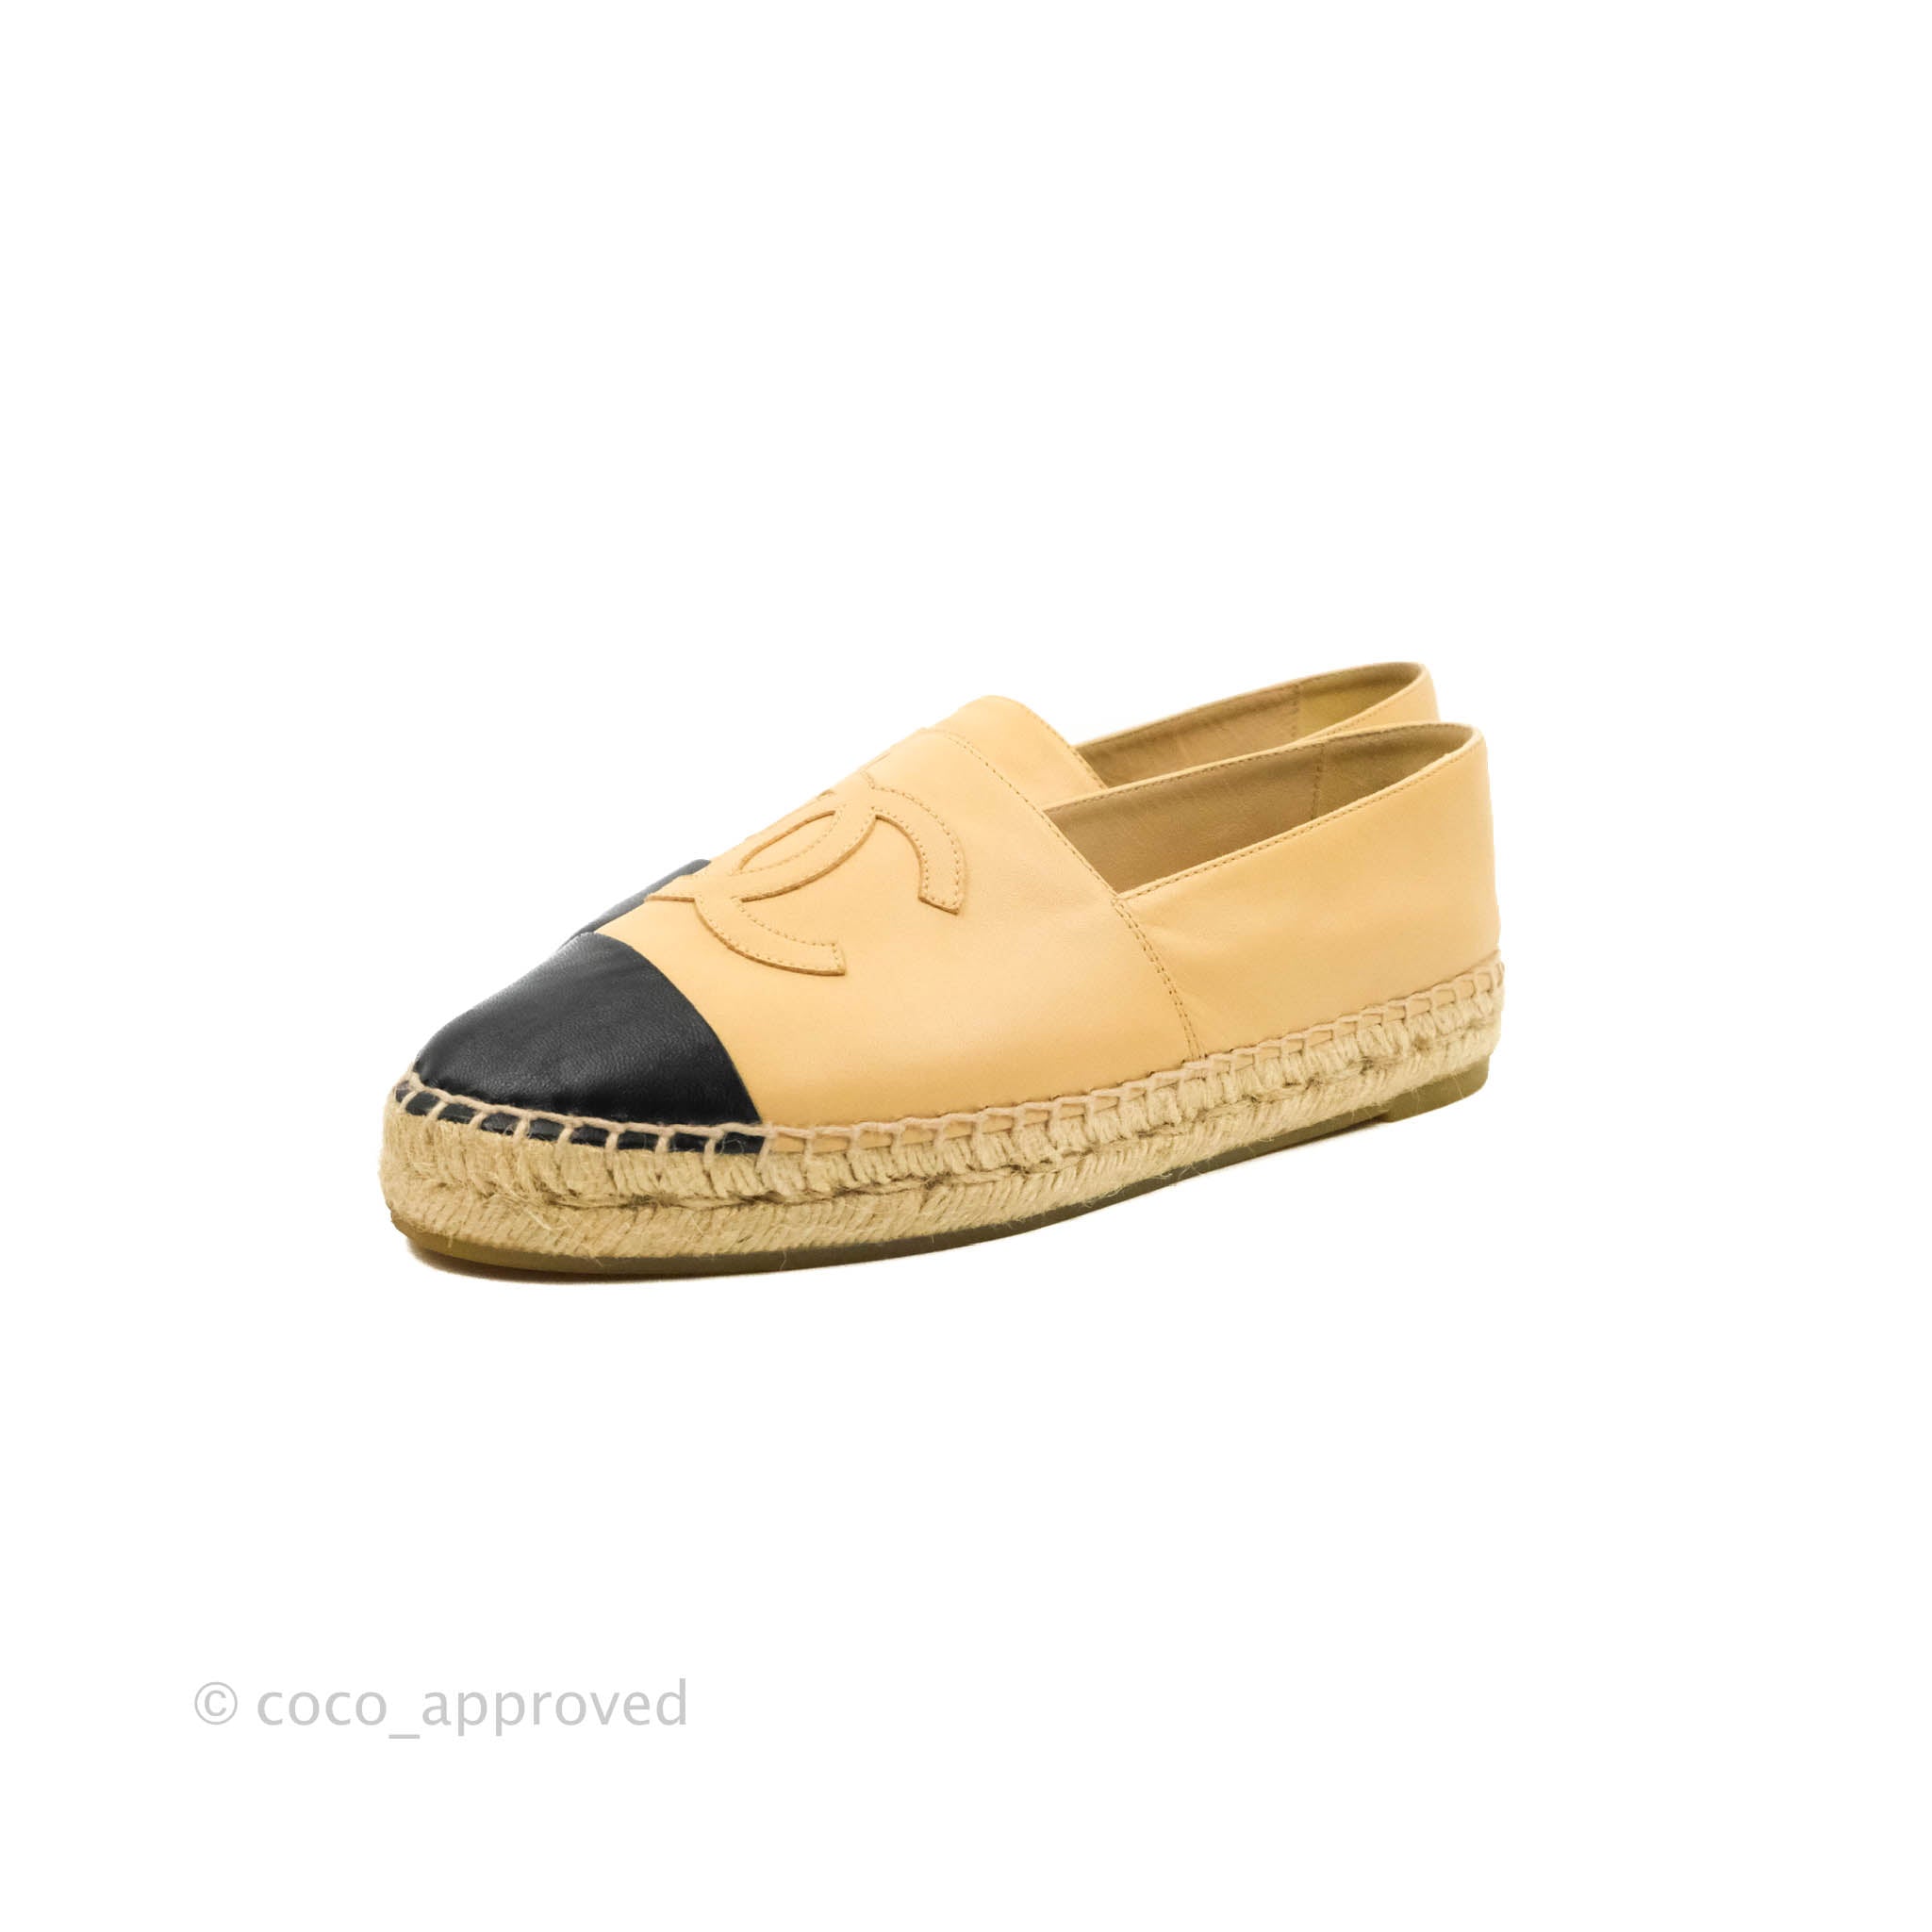 Leather espadrilles Chanel Beige size 37.5 EU in Leather - 38657744